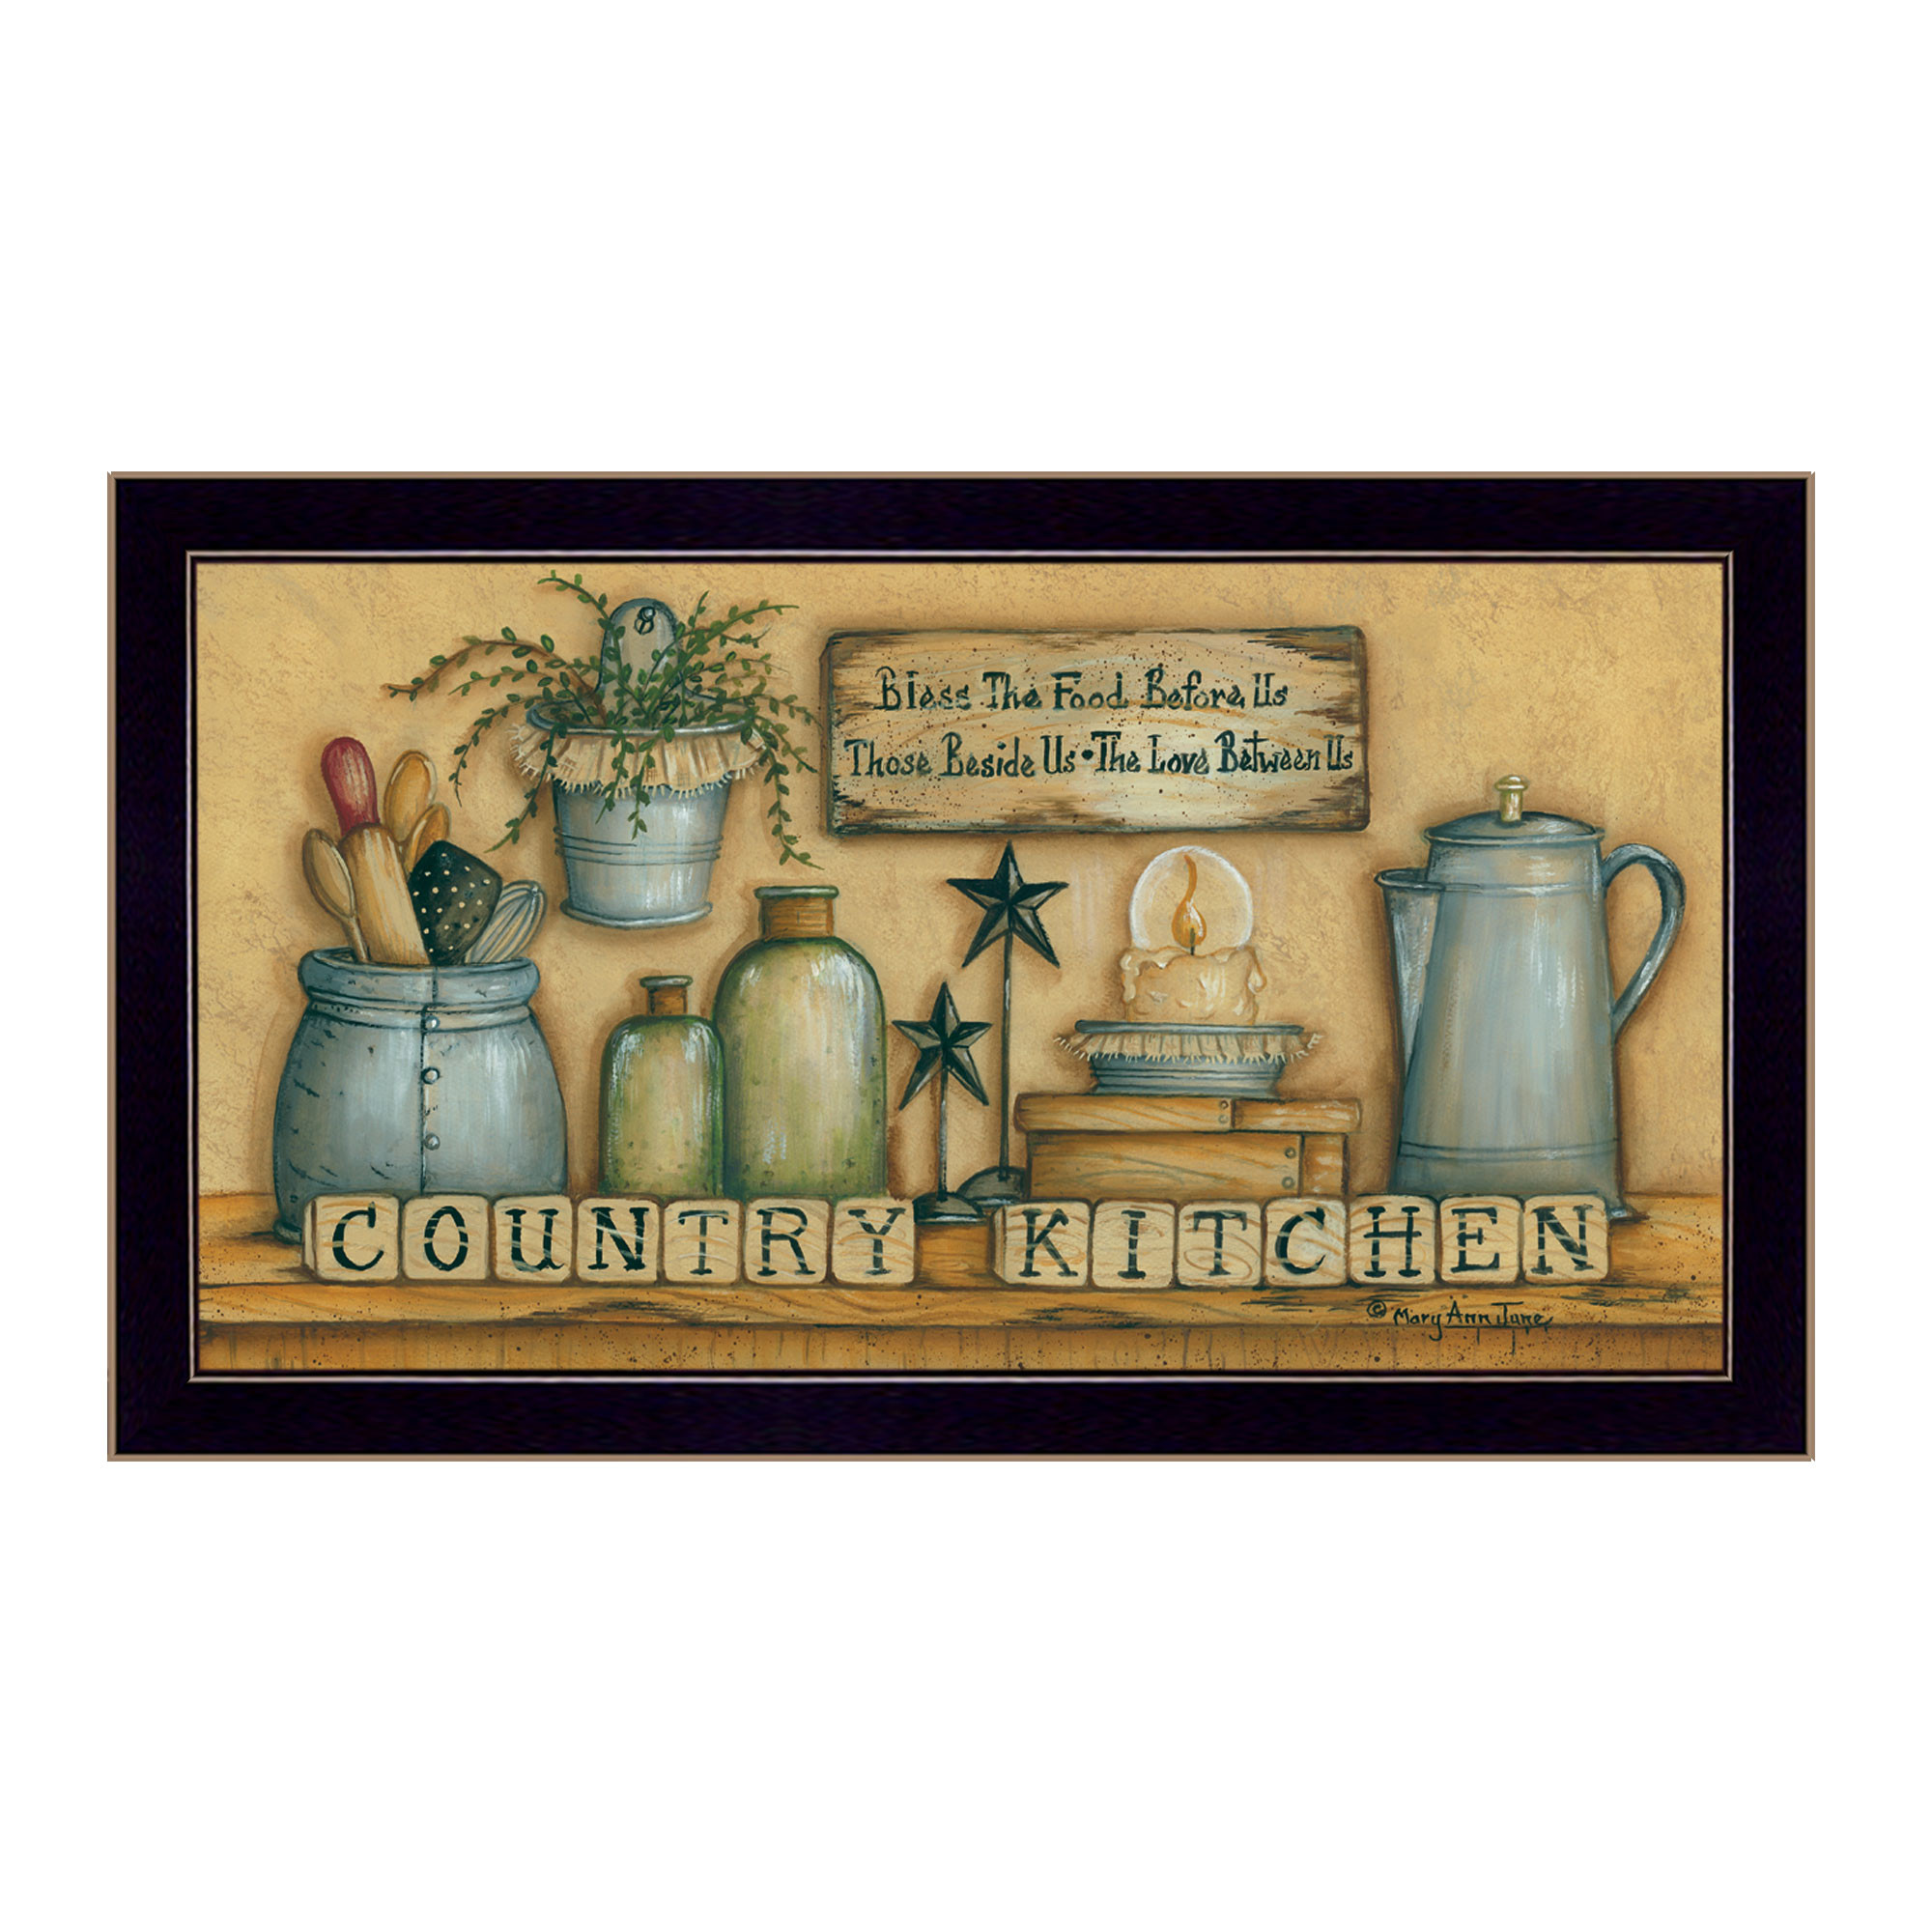 Kitchen Framed Wall Art
 "Country Kitchen" by Mary June Printed Framed Wall Art